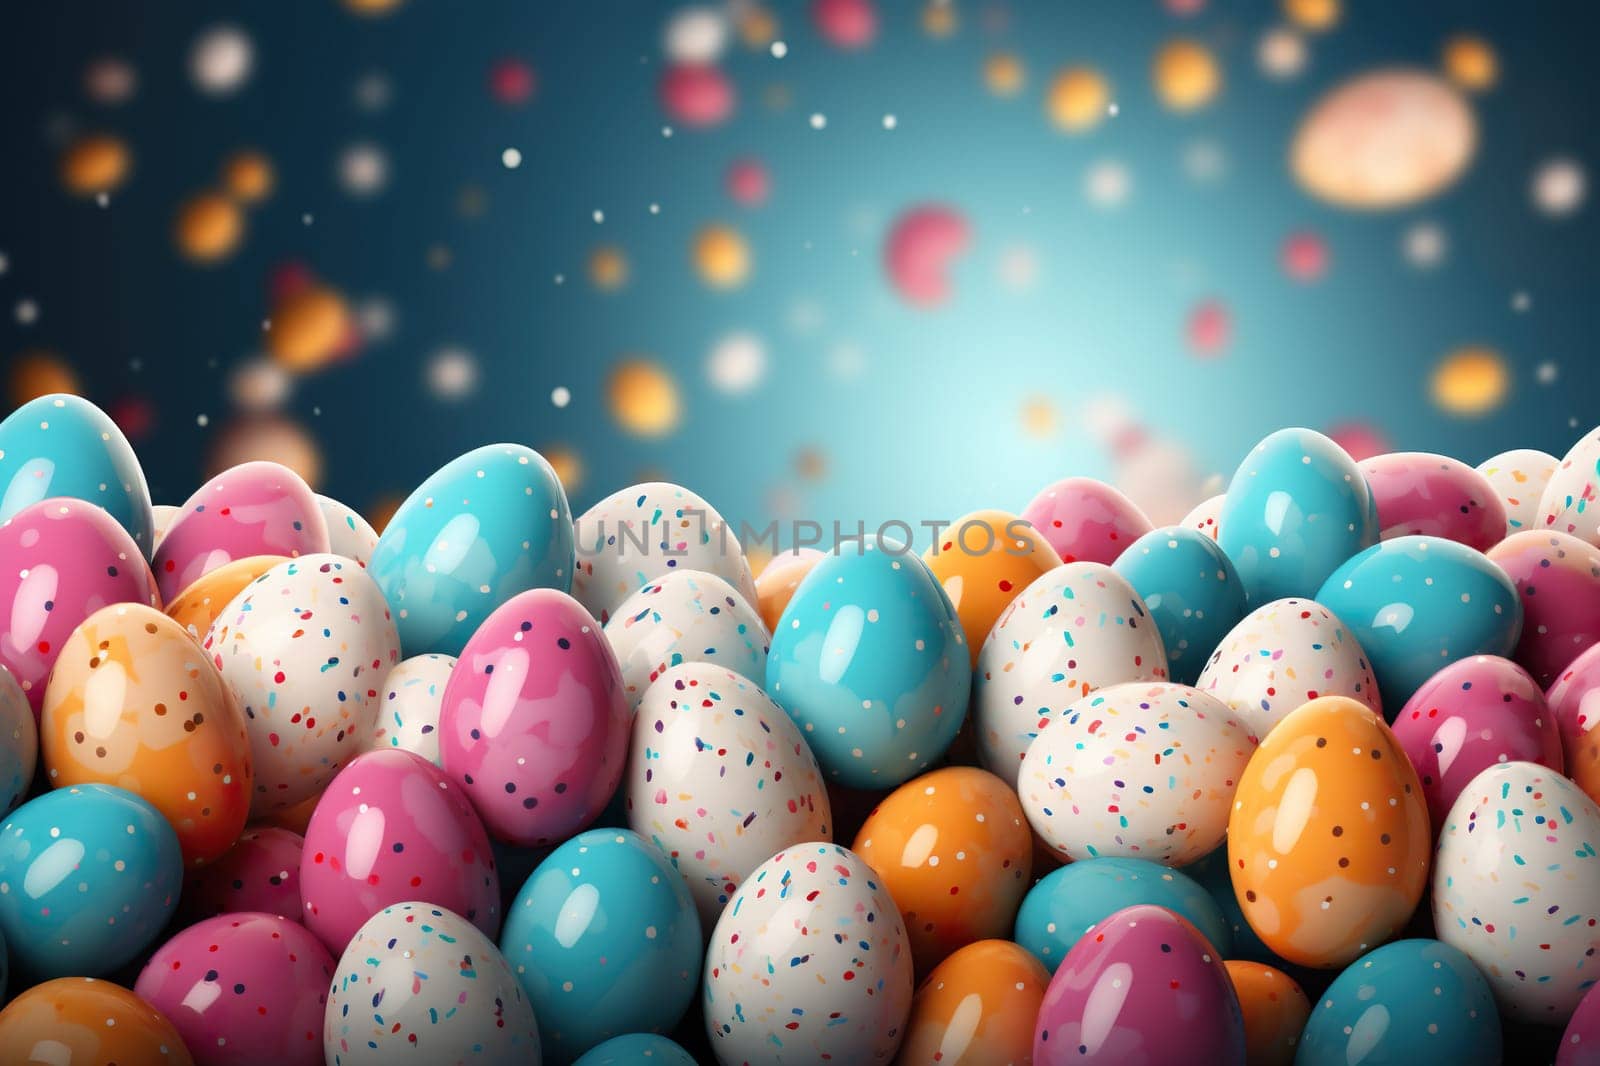 A bunch of colored Easter eggs on a blurred blue background.